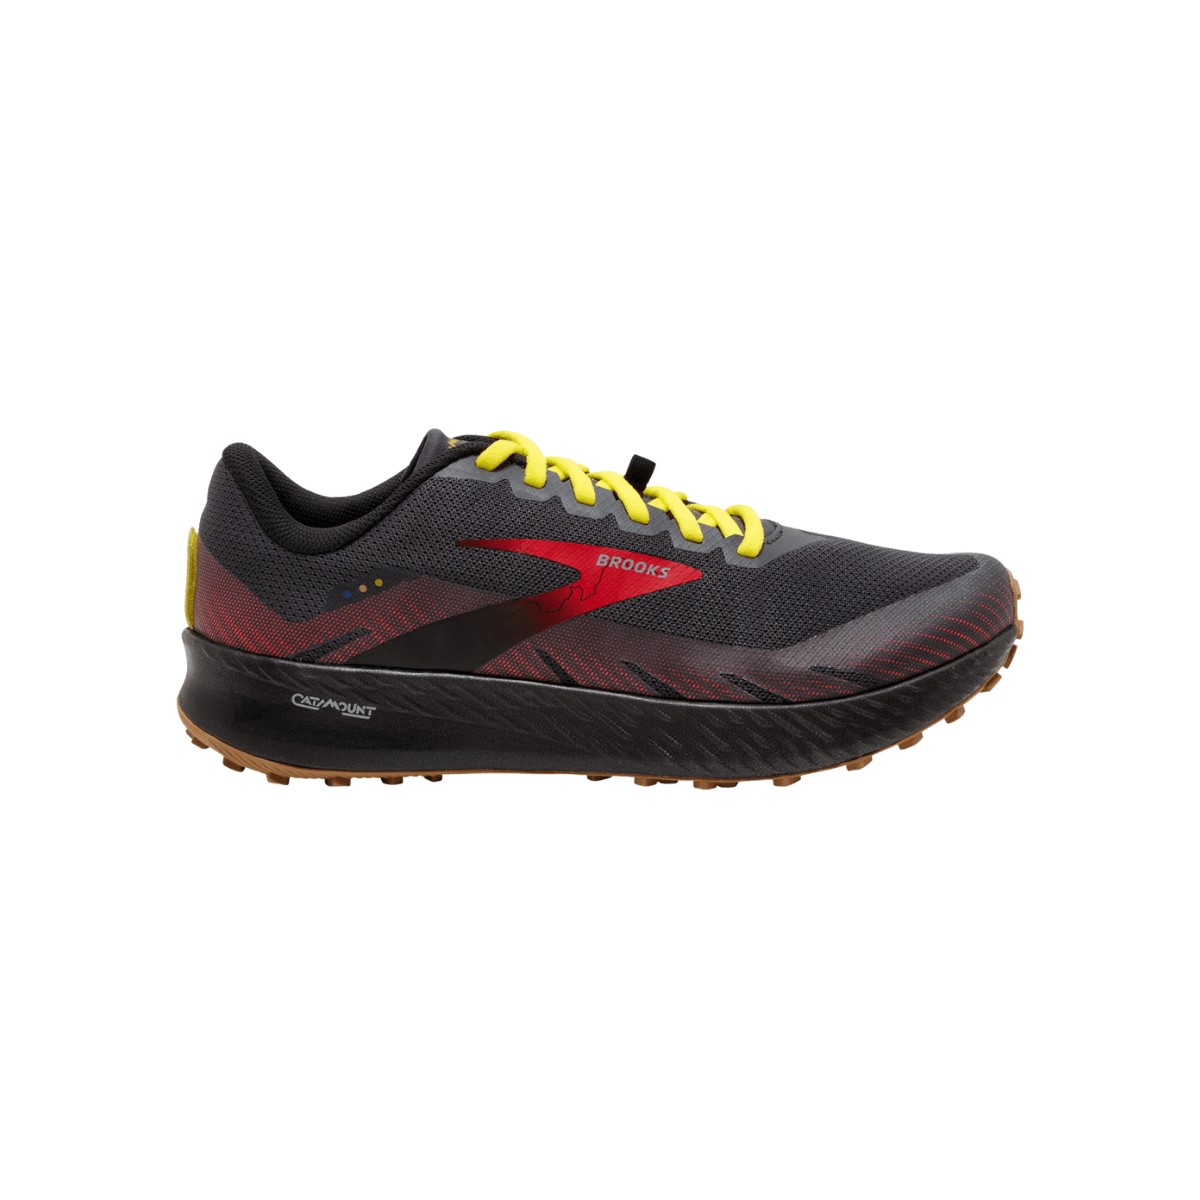 Brooks Catamount Shoes Black Red Yellow SS22, Size 41 - EUR